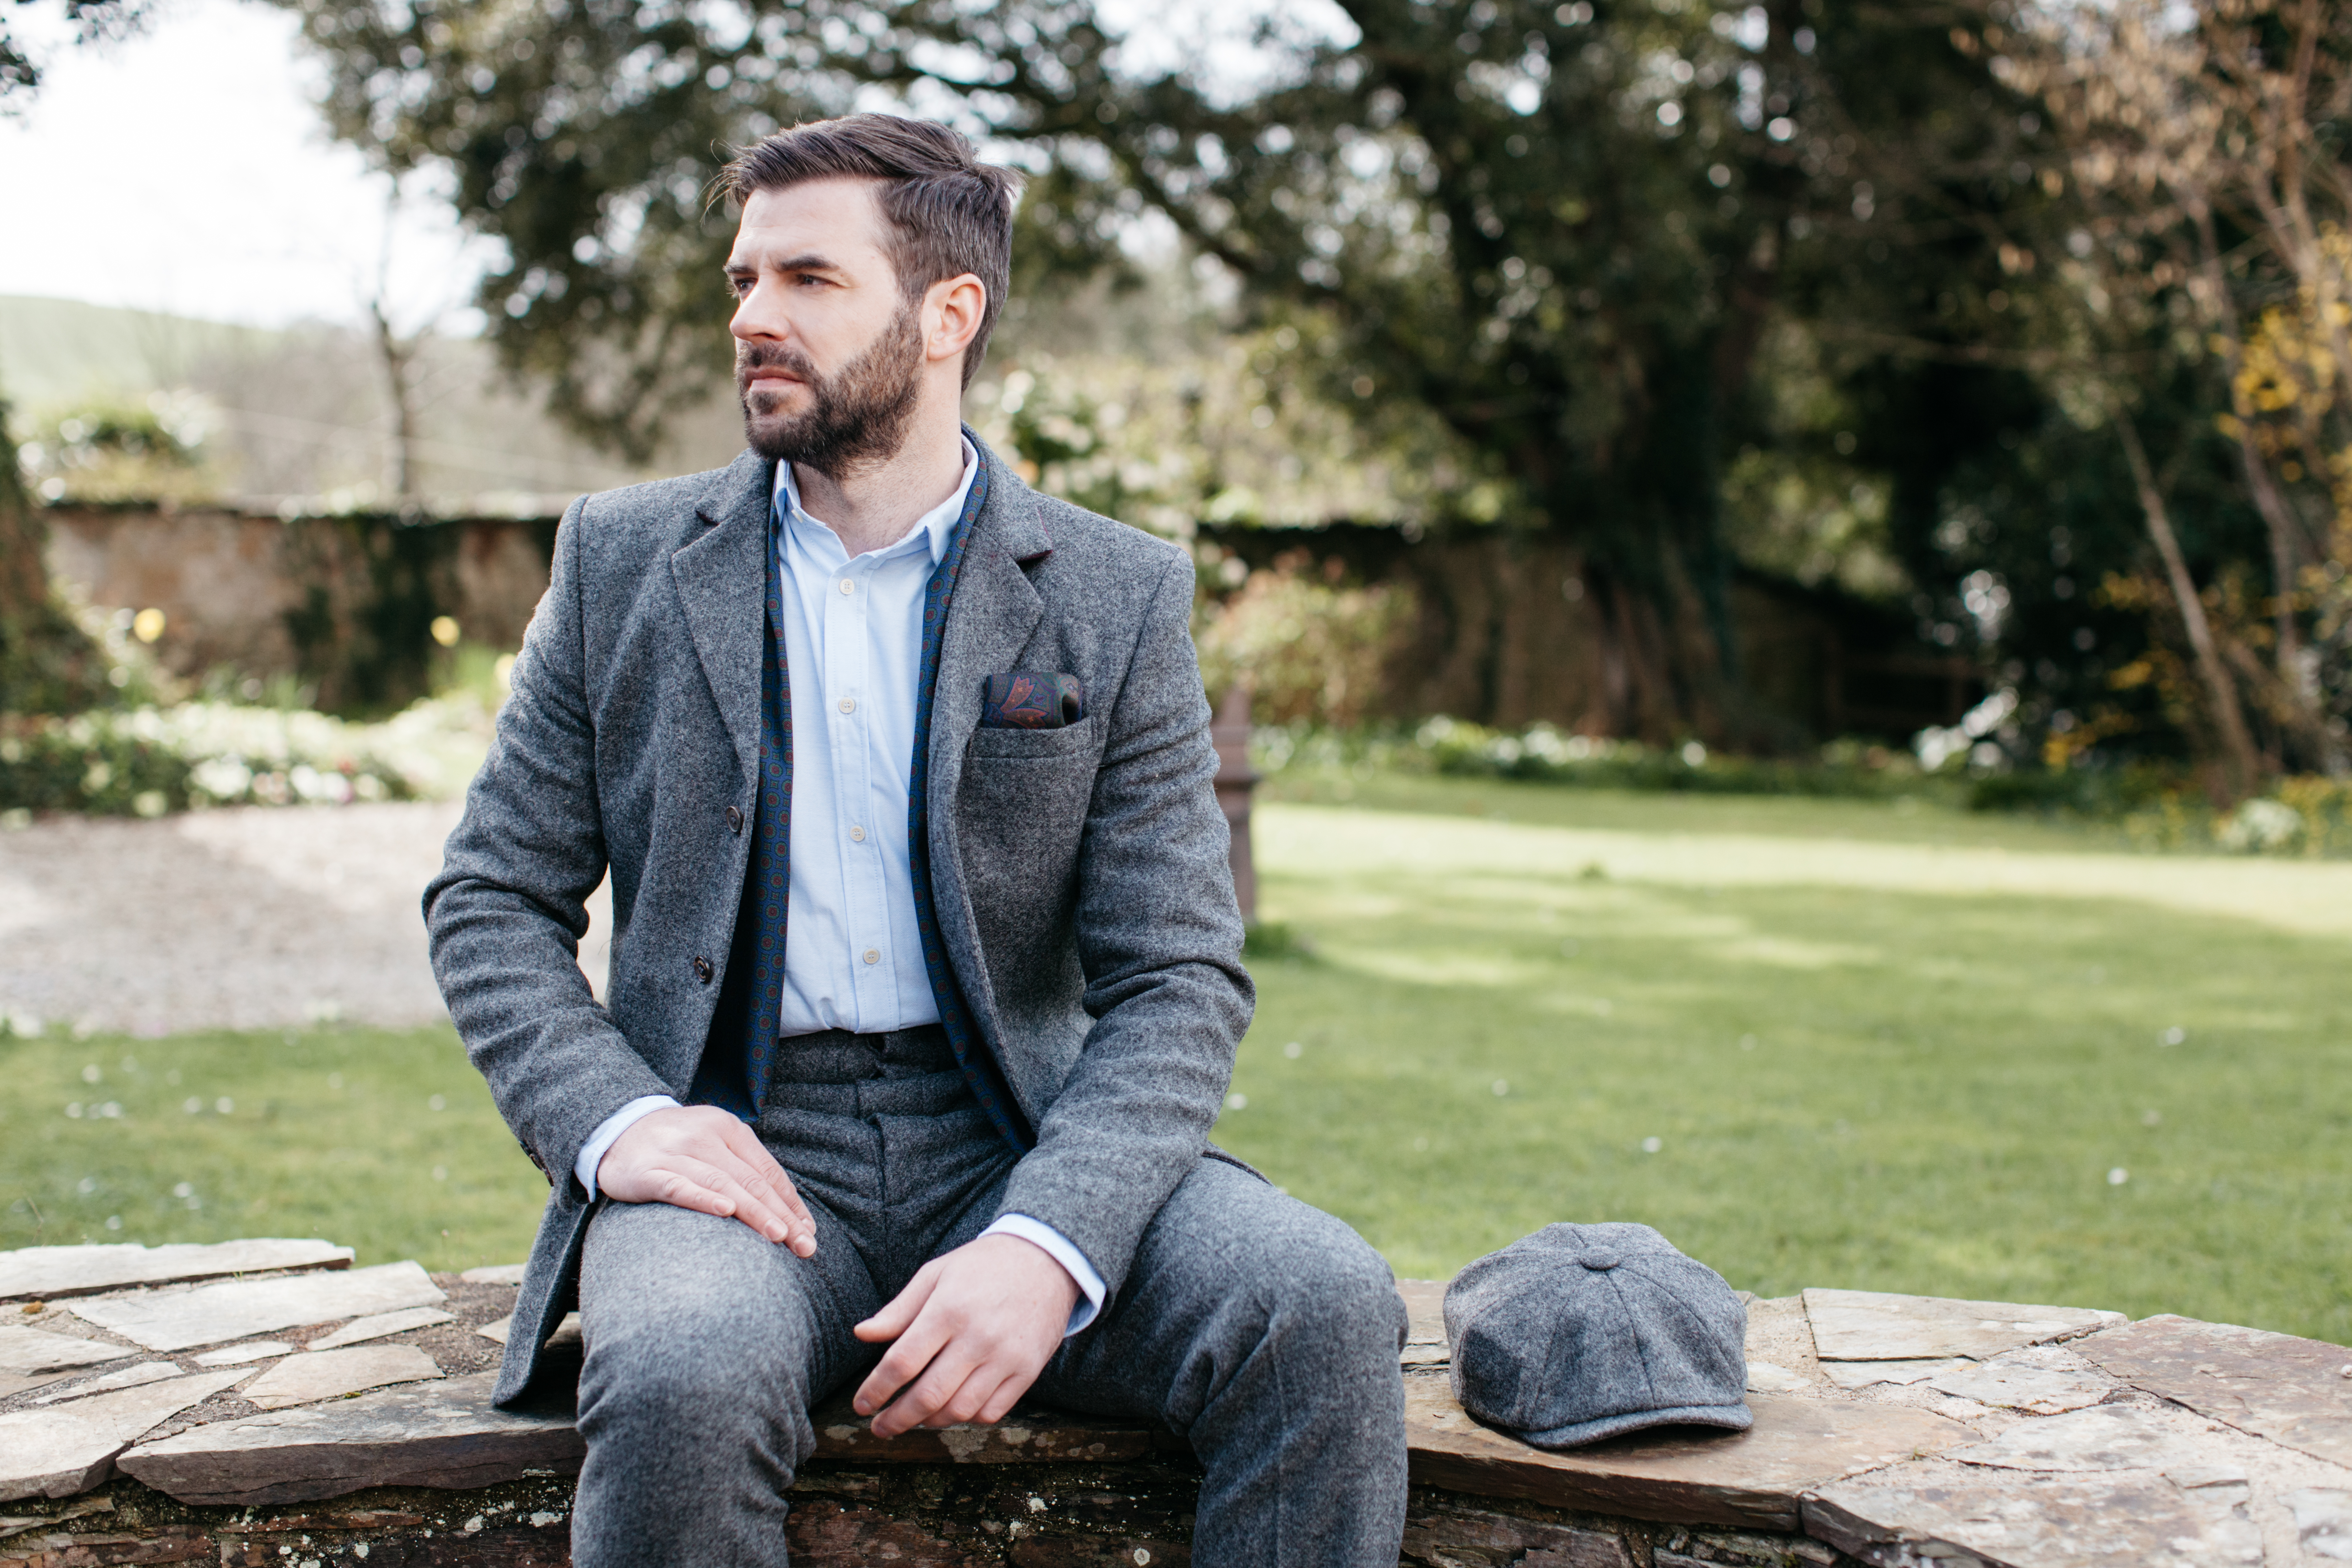 A Tweed Wedding Suit For a Groom - Garrison Tailors